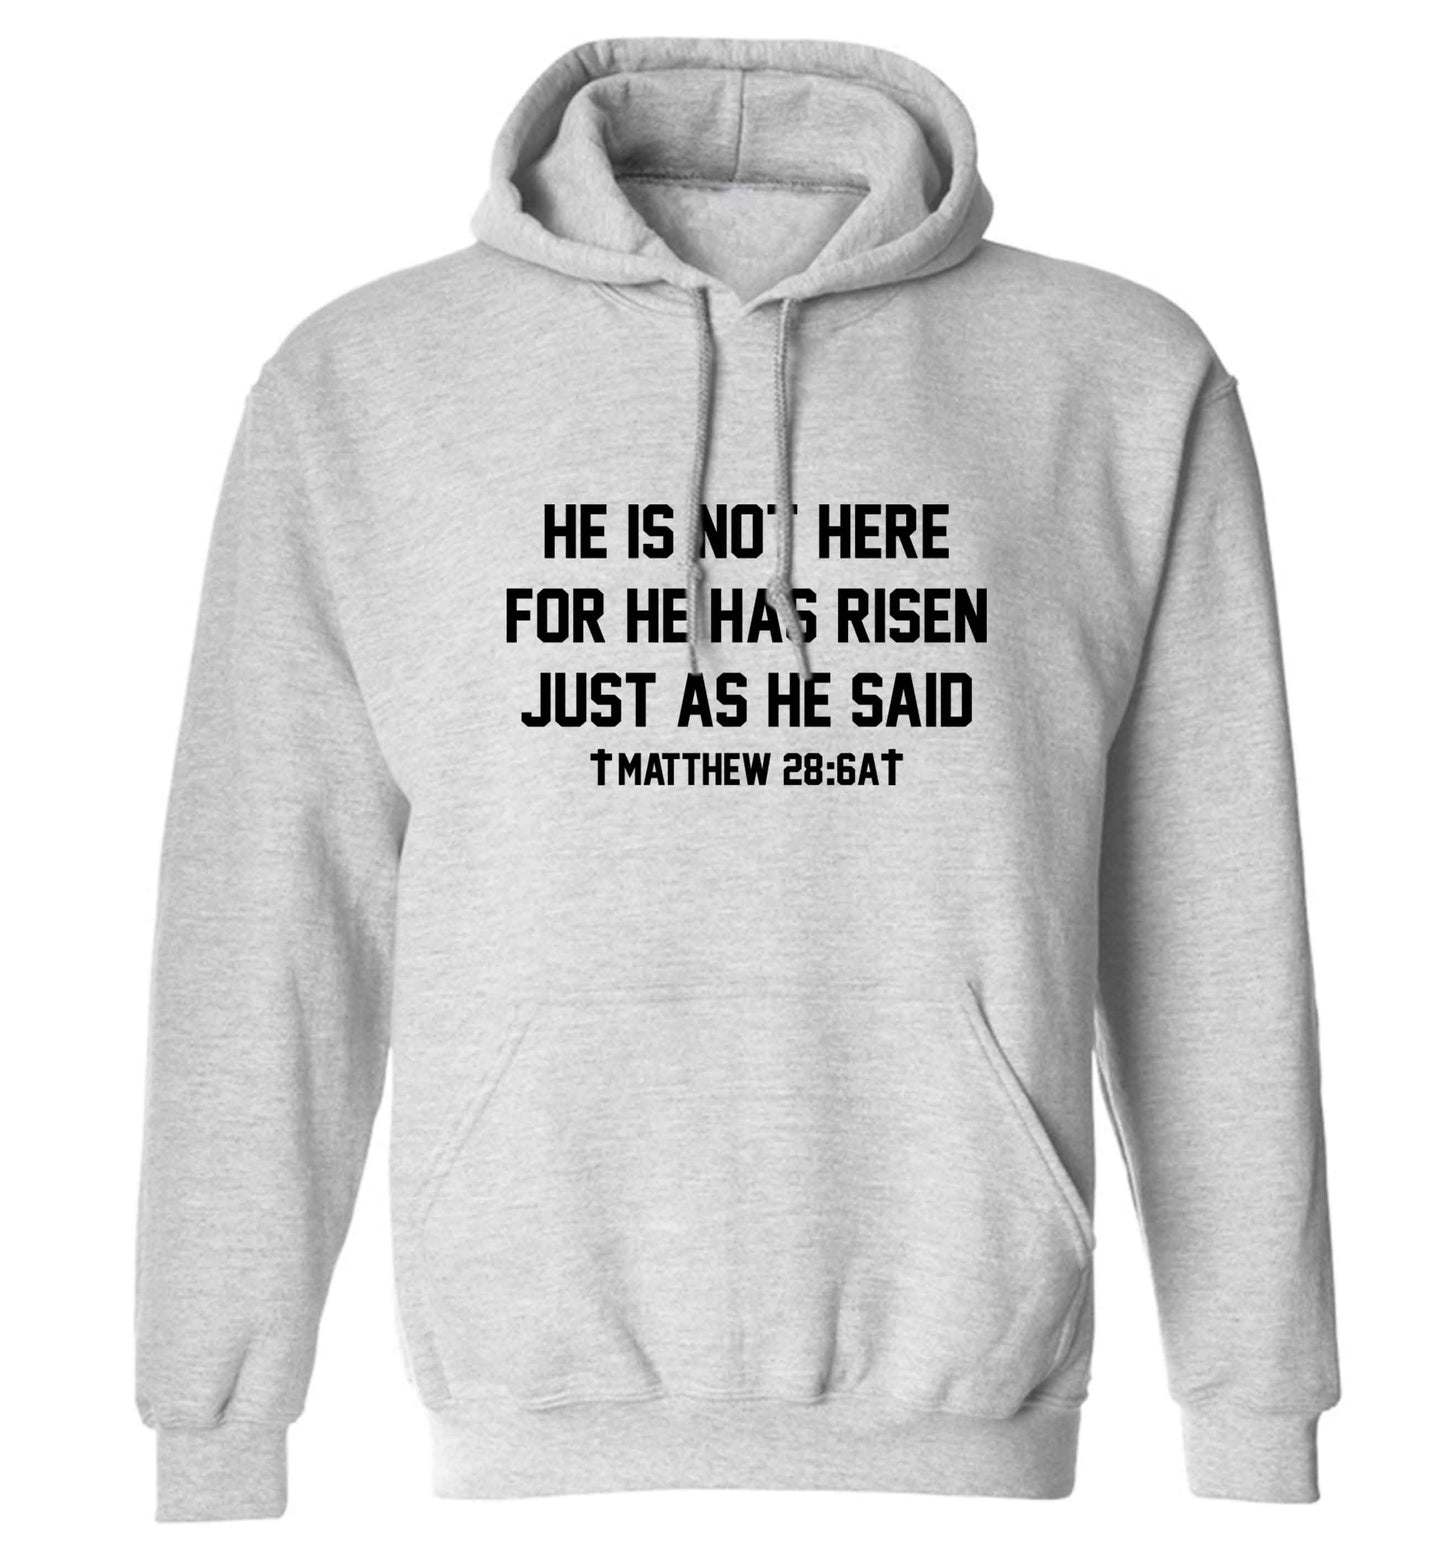 He is not here for he has risen just as he said matthew 28:6A adults unisex grey hoodie 2XL